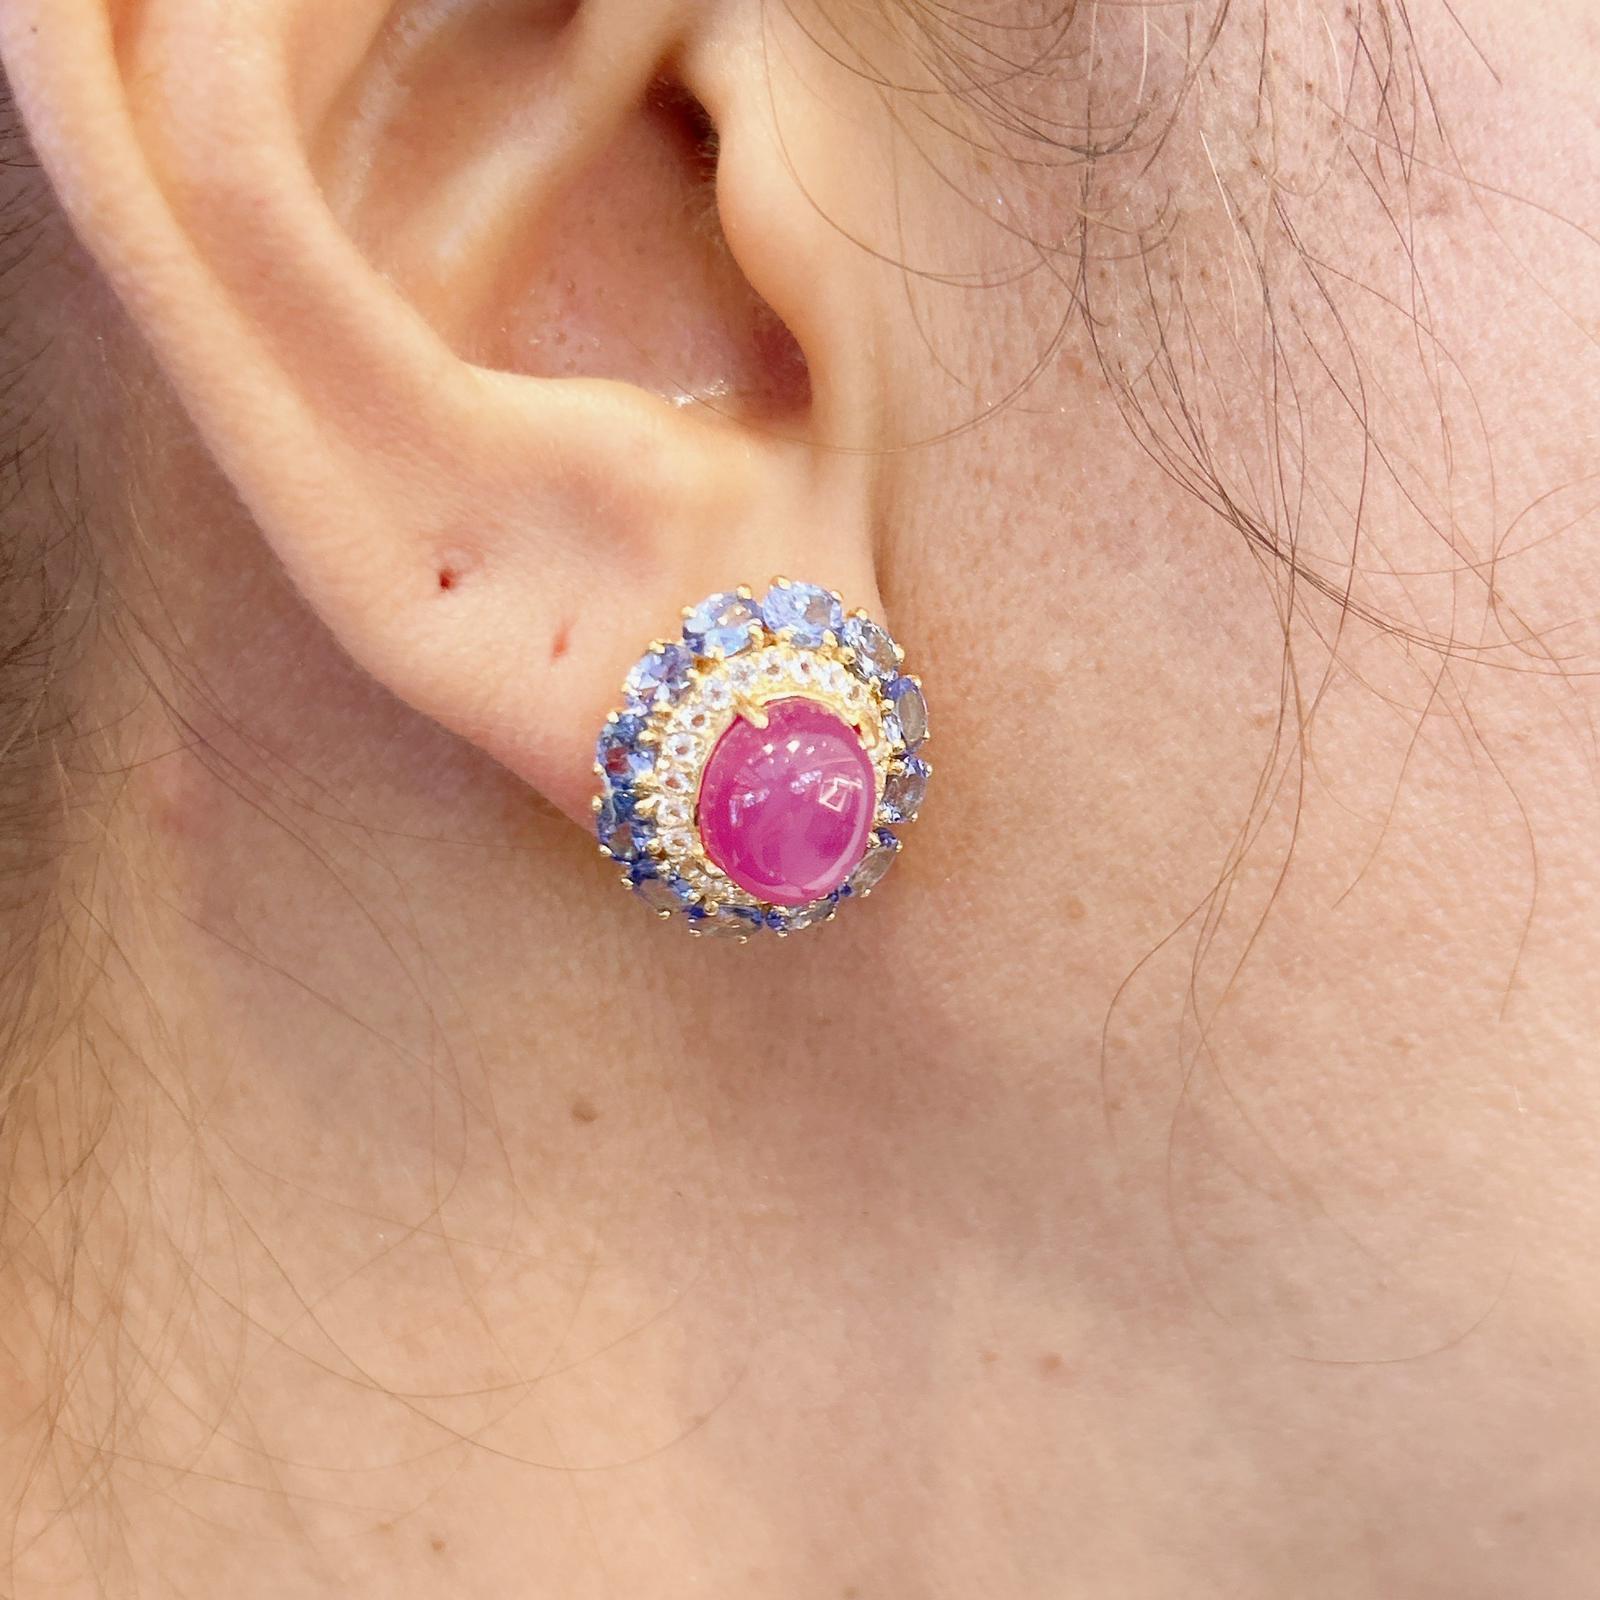 Bochic “Capri” Natural Ruby & Tanzanite Earrings Set in 22k Gold & Silver In New Condition For Sale In New York, NY